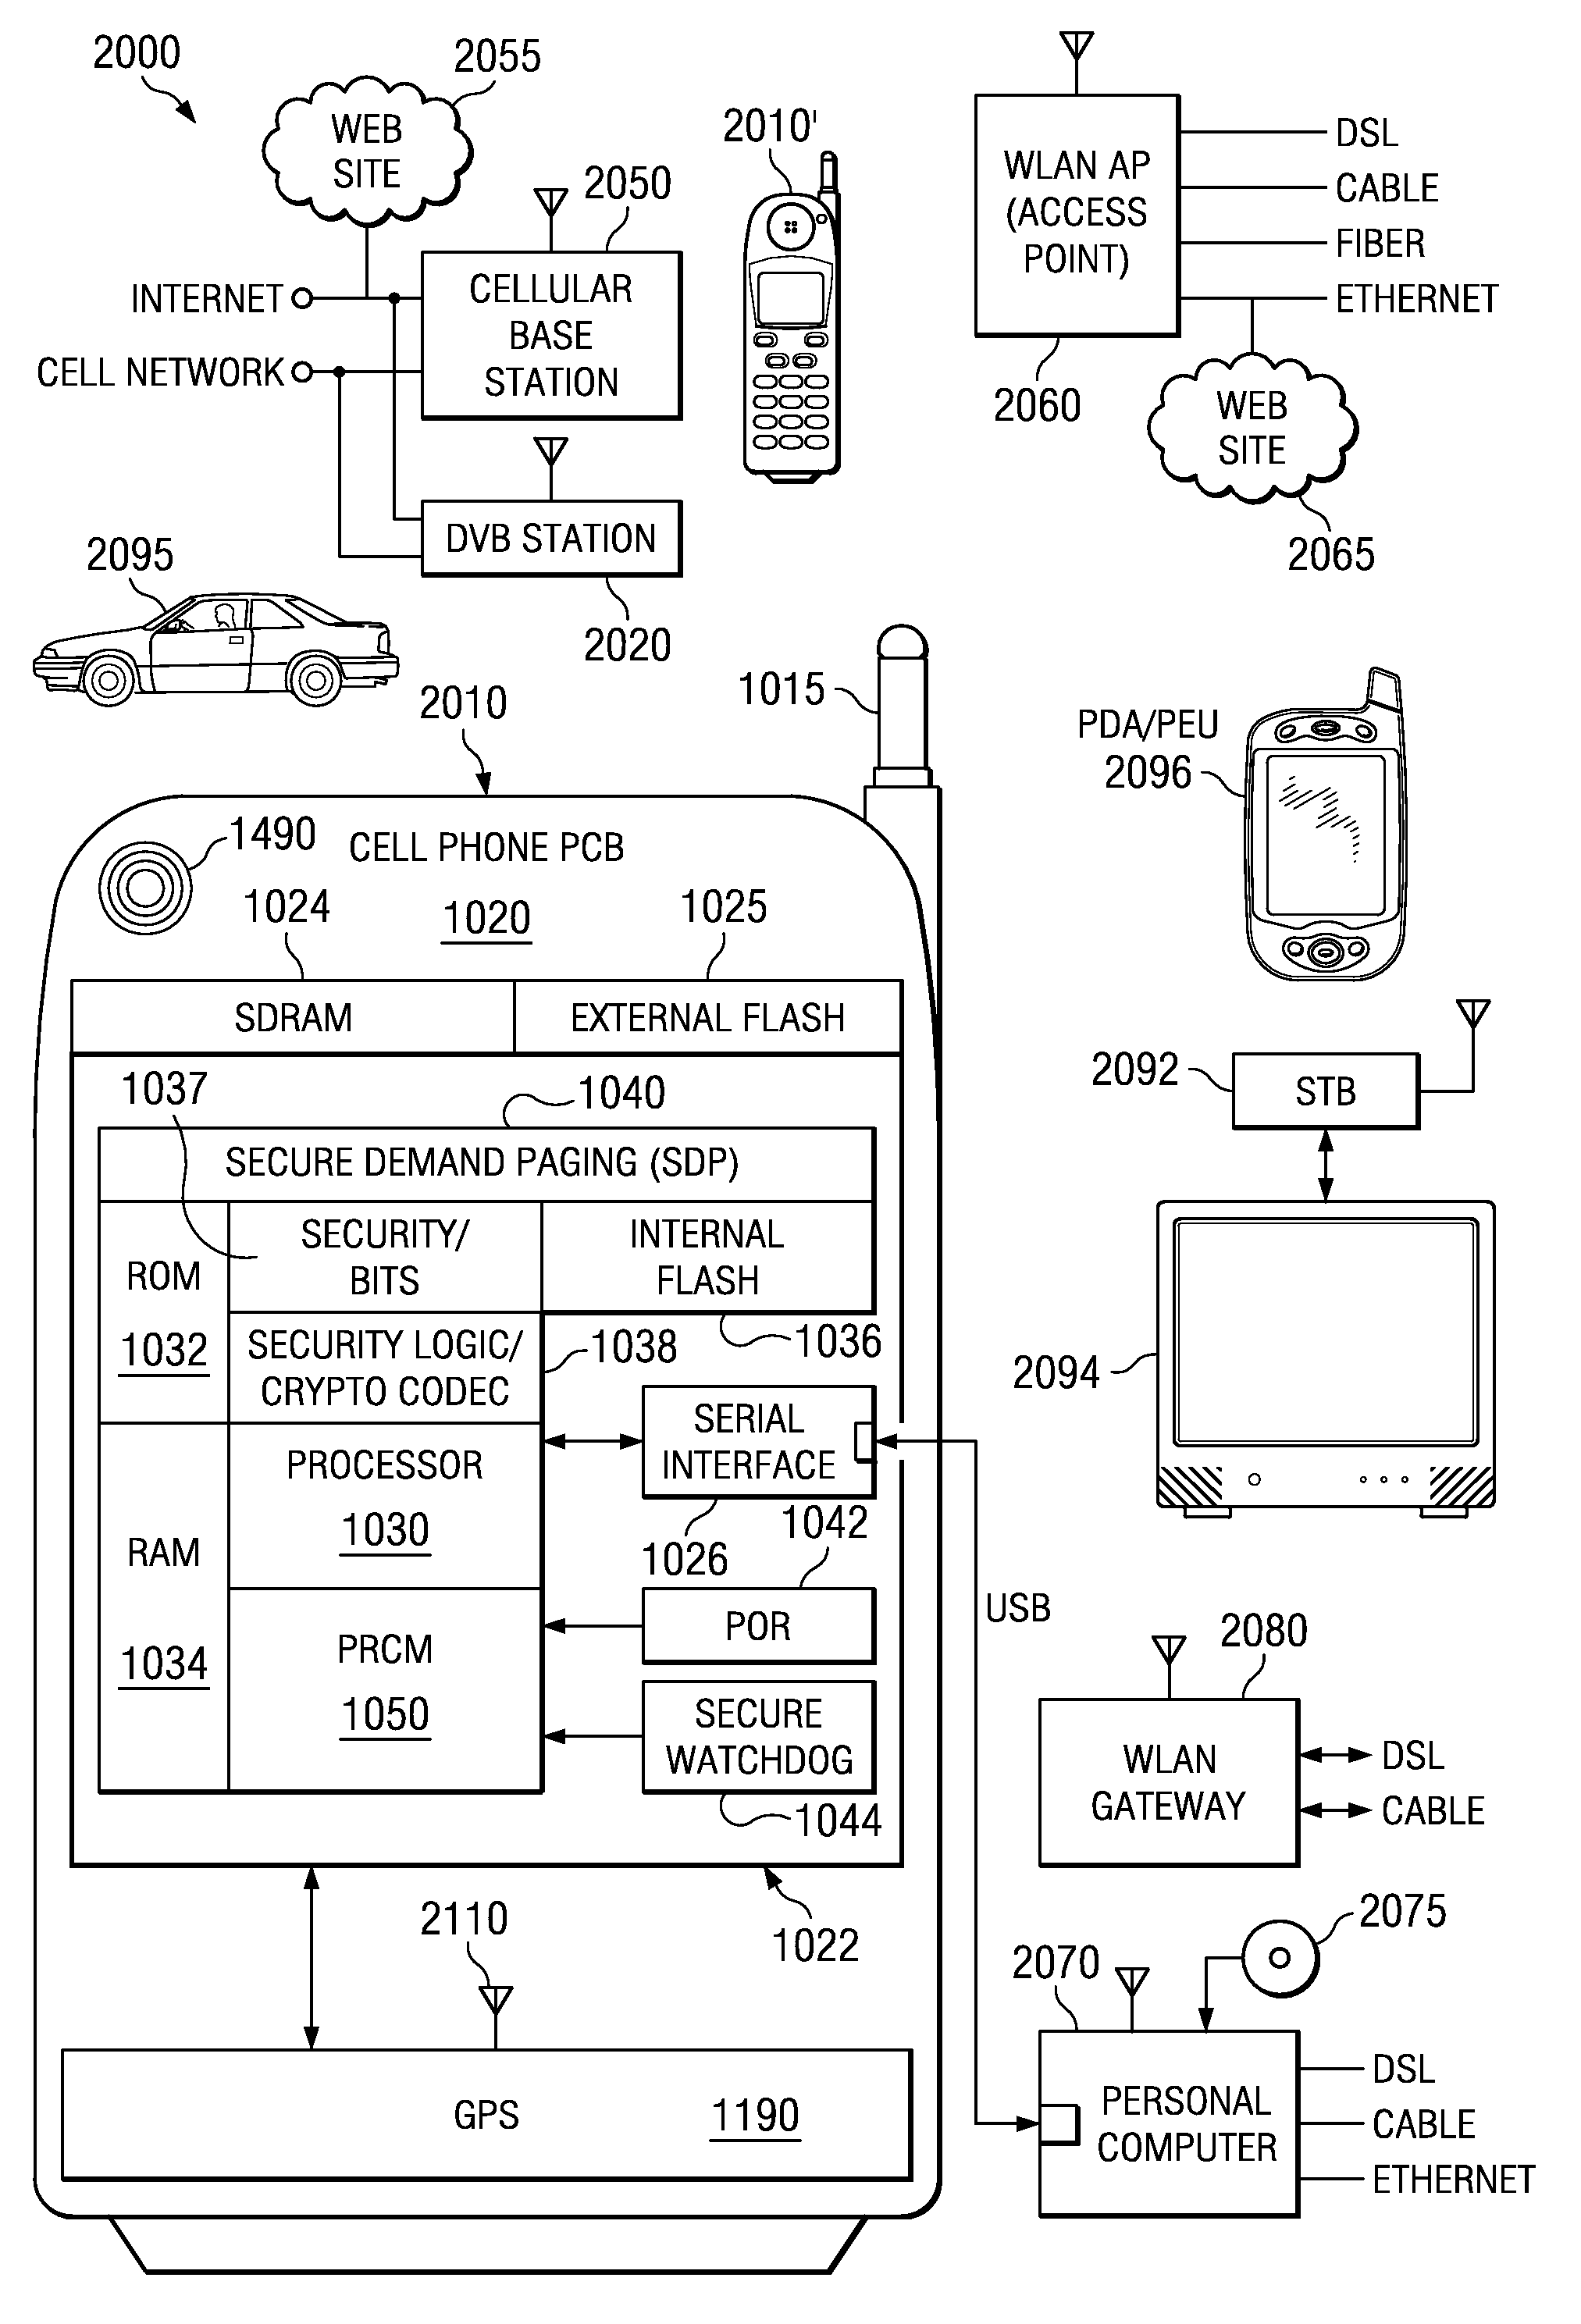 Satellite (GPS) assisted clock apparatus, circuits, systems and processes for cellular terminals on asynchronous networks